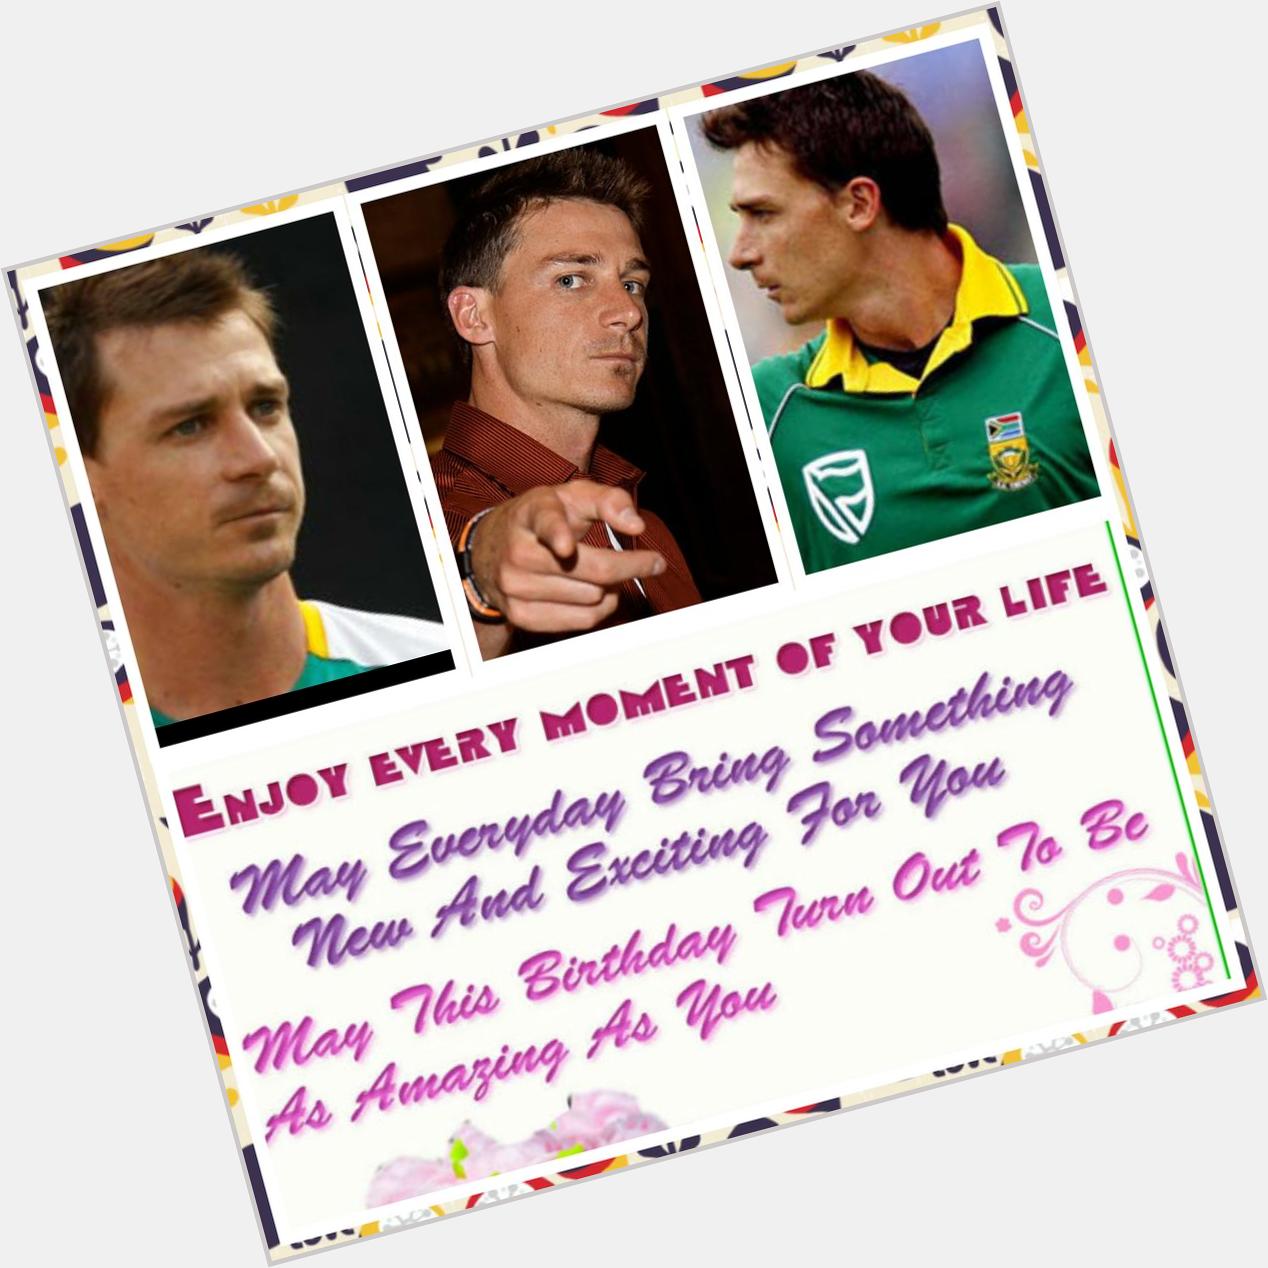  <Happy birthday Dale Steyn> may your birthday be filled with sunshine,smiles,laughter,love and cheer. 